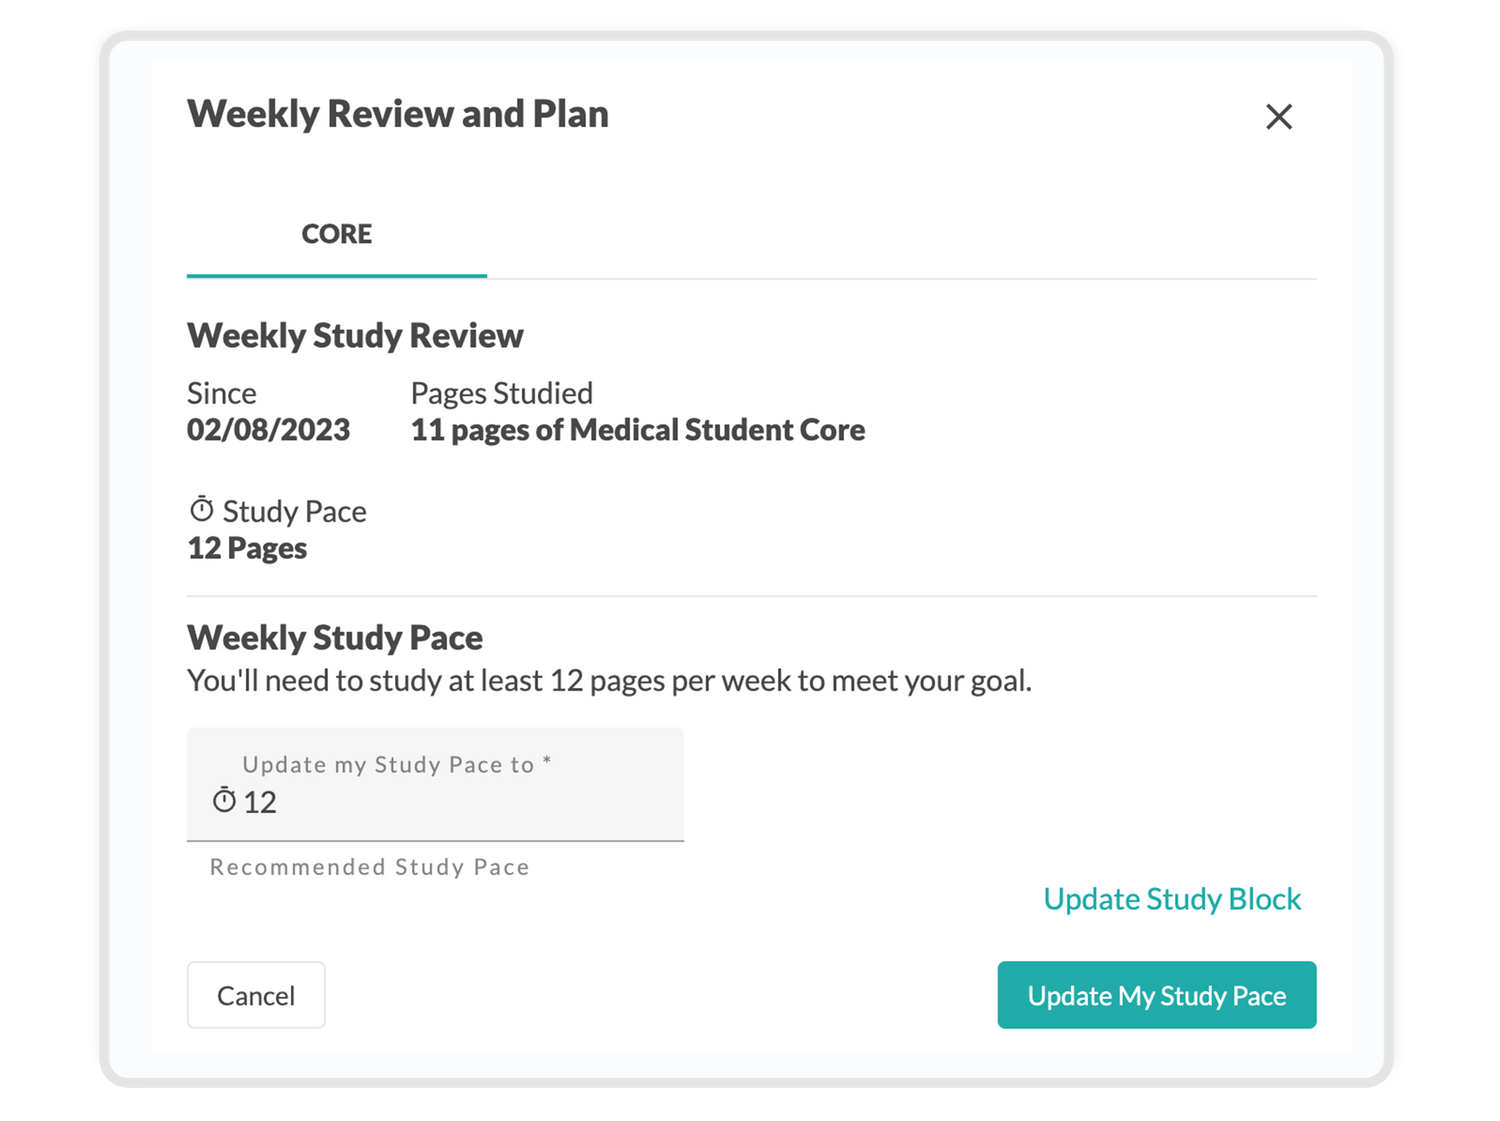 personal trainer weekly review pop up to update study pace and study block